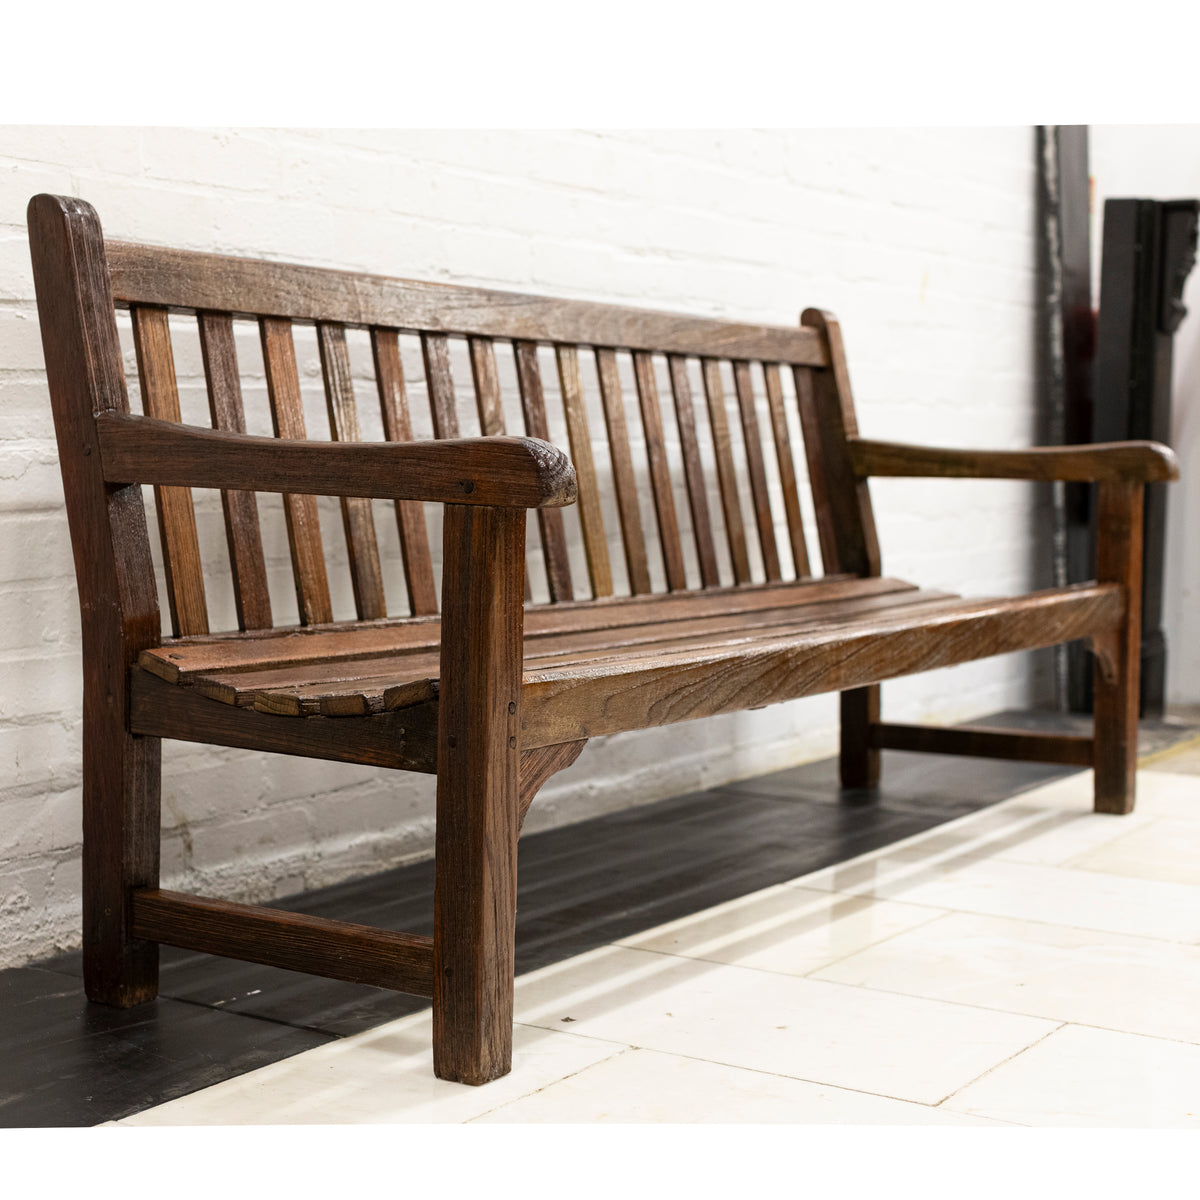 Reclaimed Teak Bench | The Architectural Forum